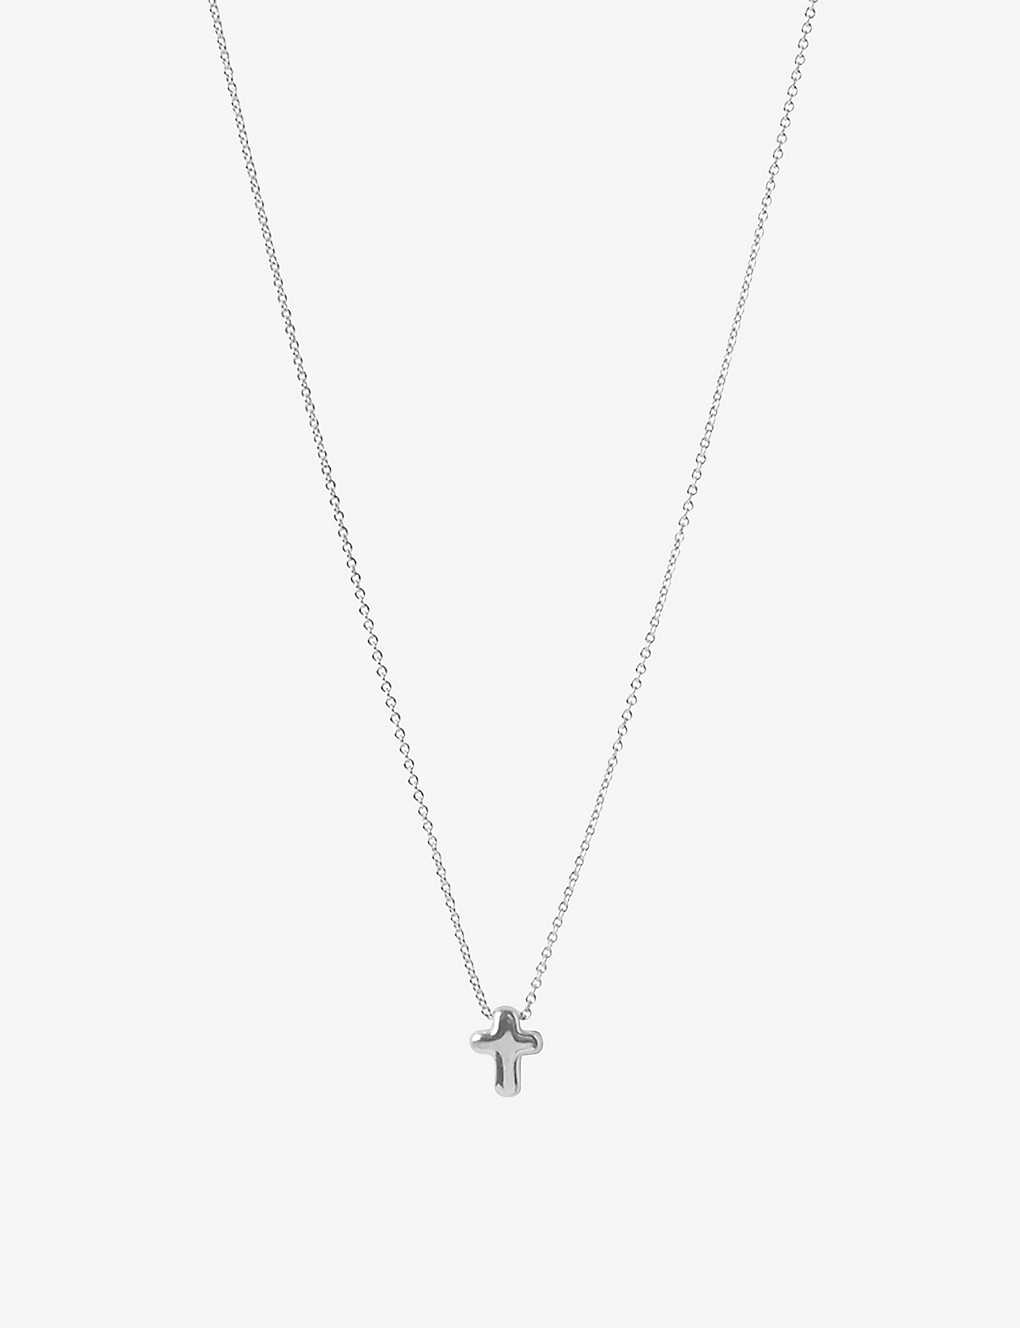 The Alkemistry Womens 18ct White Gold Chubby Cross 18ct White-gold Pendant Necklace